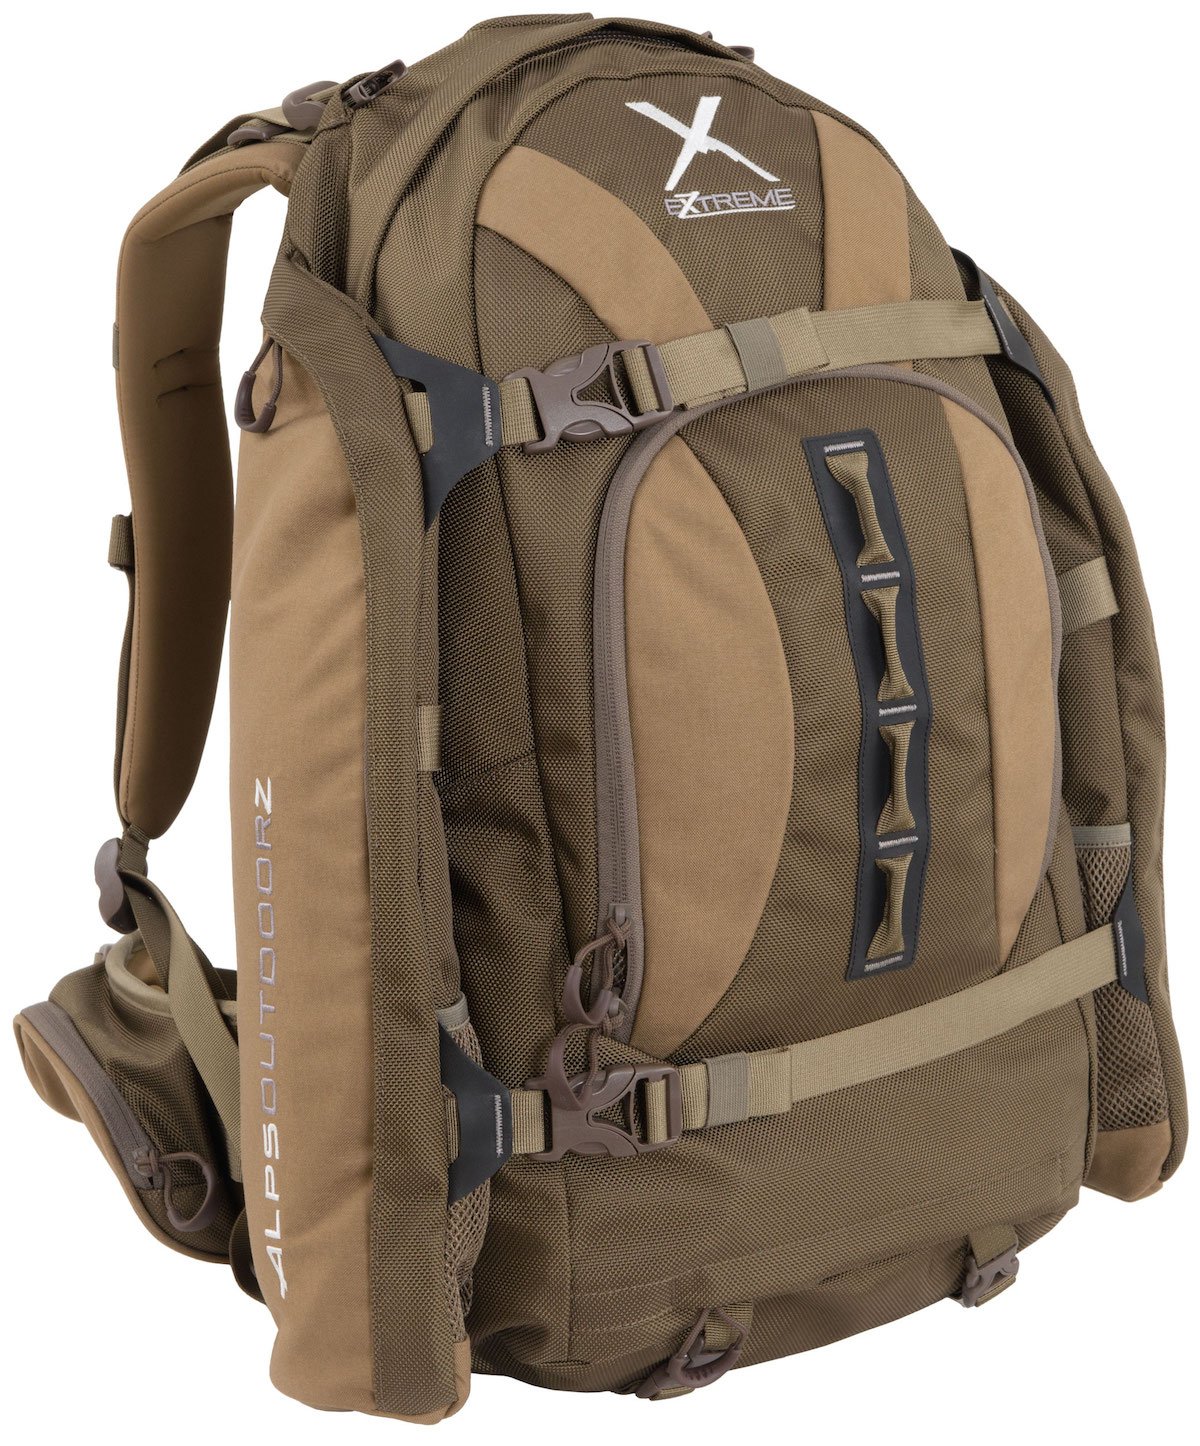 The Monarch X pack by ALPS OutdoorZ is designed to be functional yet comfortable for female hunters. (Photo: ALPS OutdoorZ)